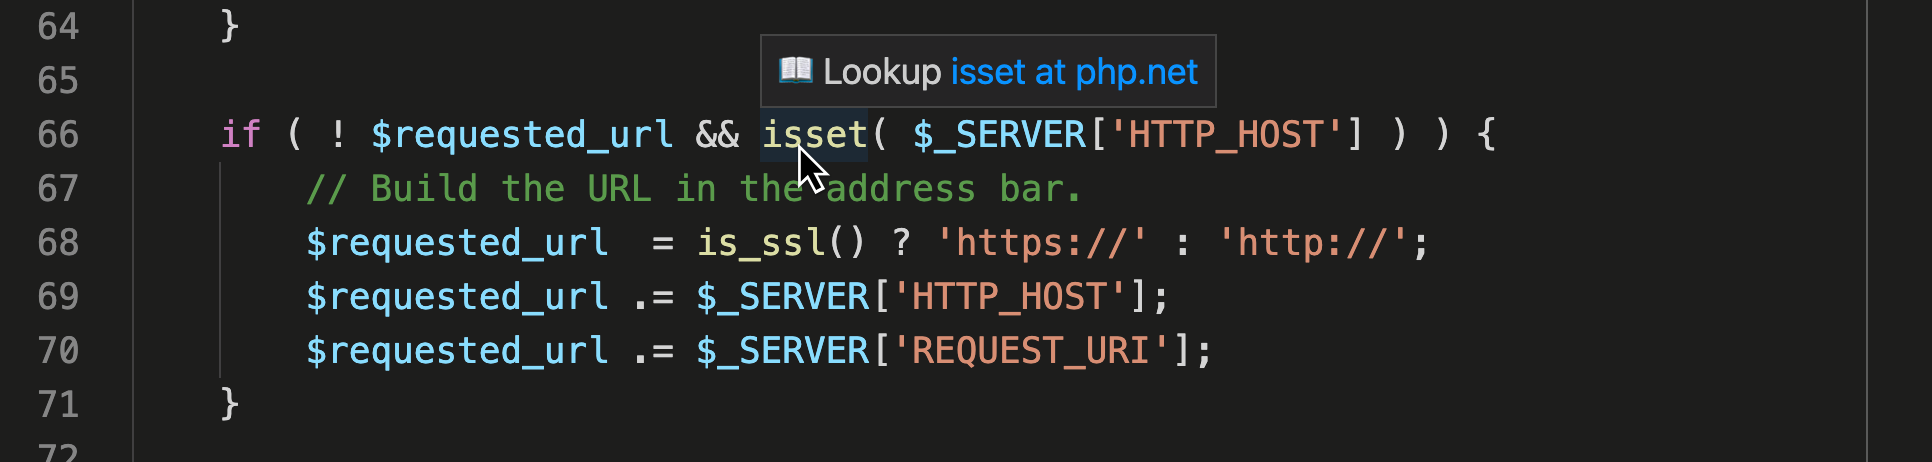 Screenshot 1: Example PHP Code, where the language construct 'isset()' is under the cursor.